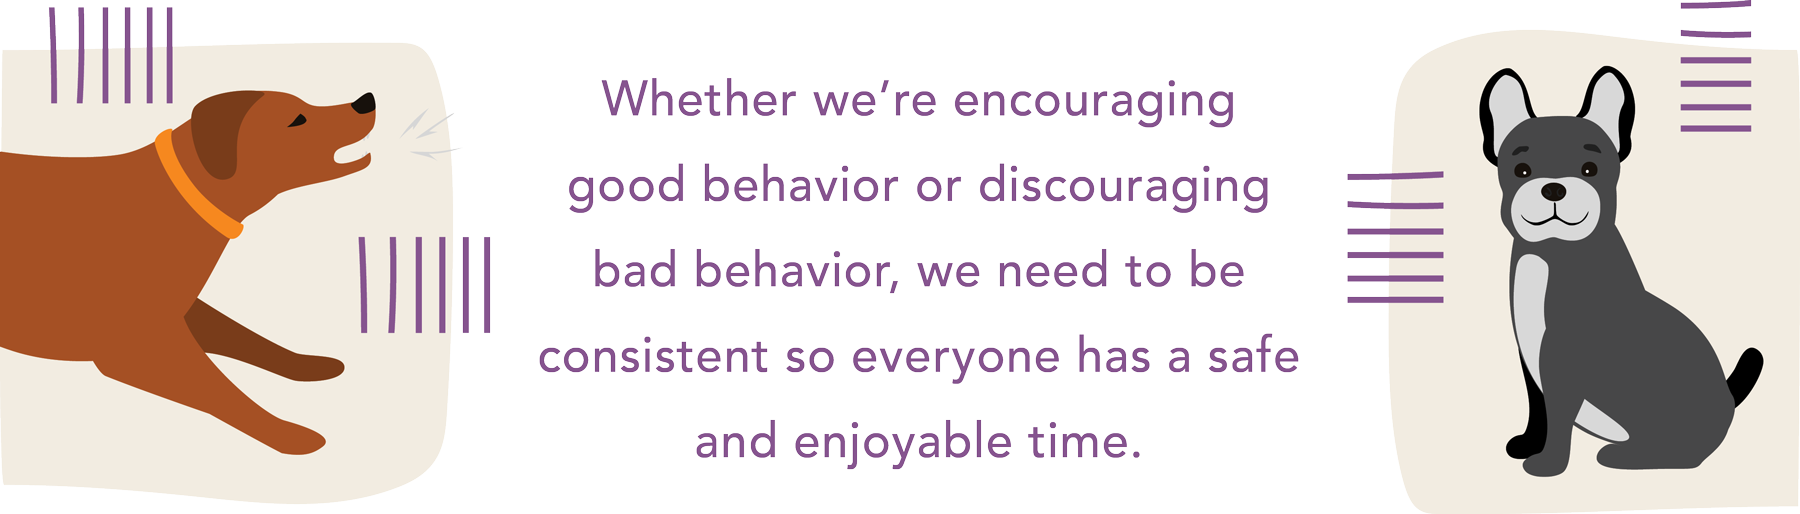 Whether we're encouraging good behavior or discouraging bad behavior, we need to be consistent so everyone has a safe and enjoyable time.